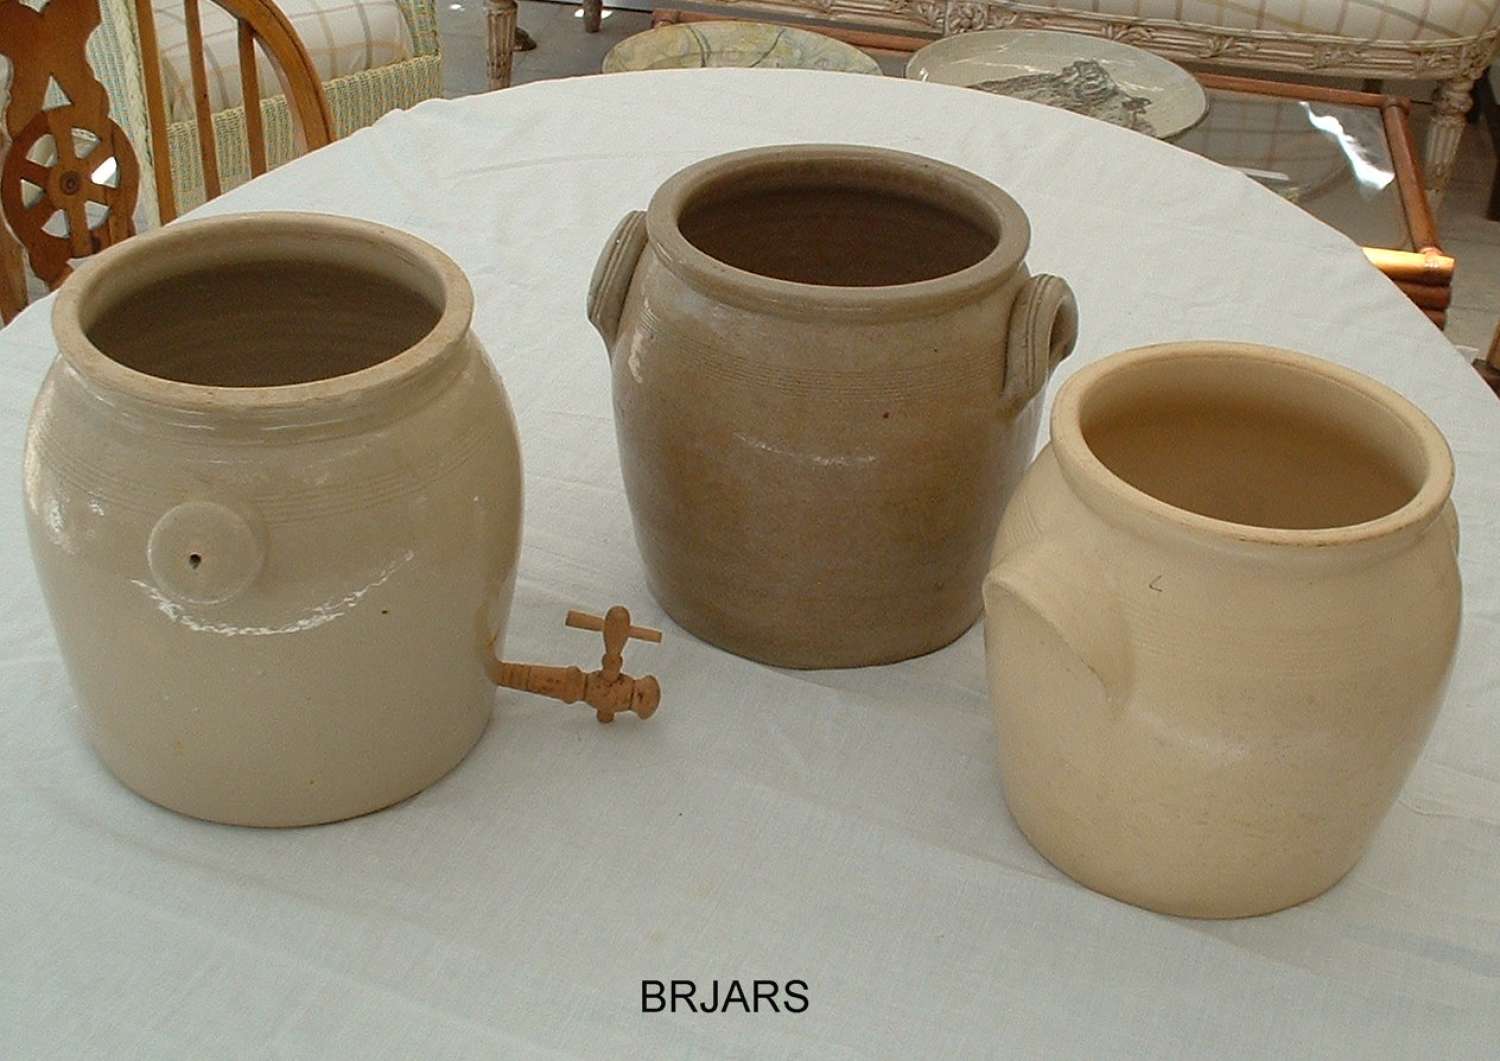 Collection of Bressan Jars